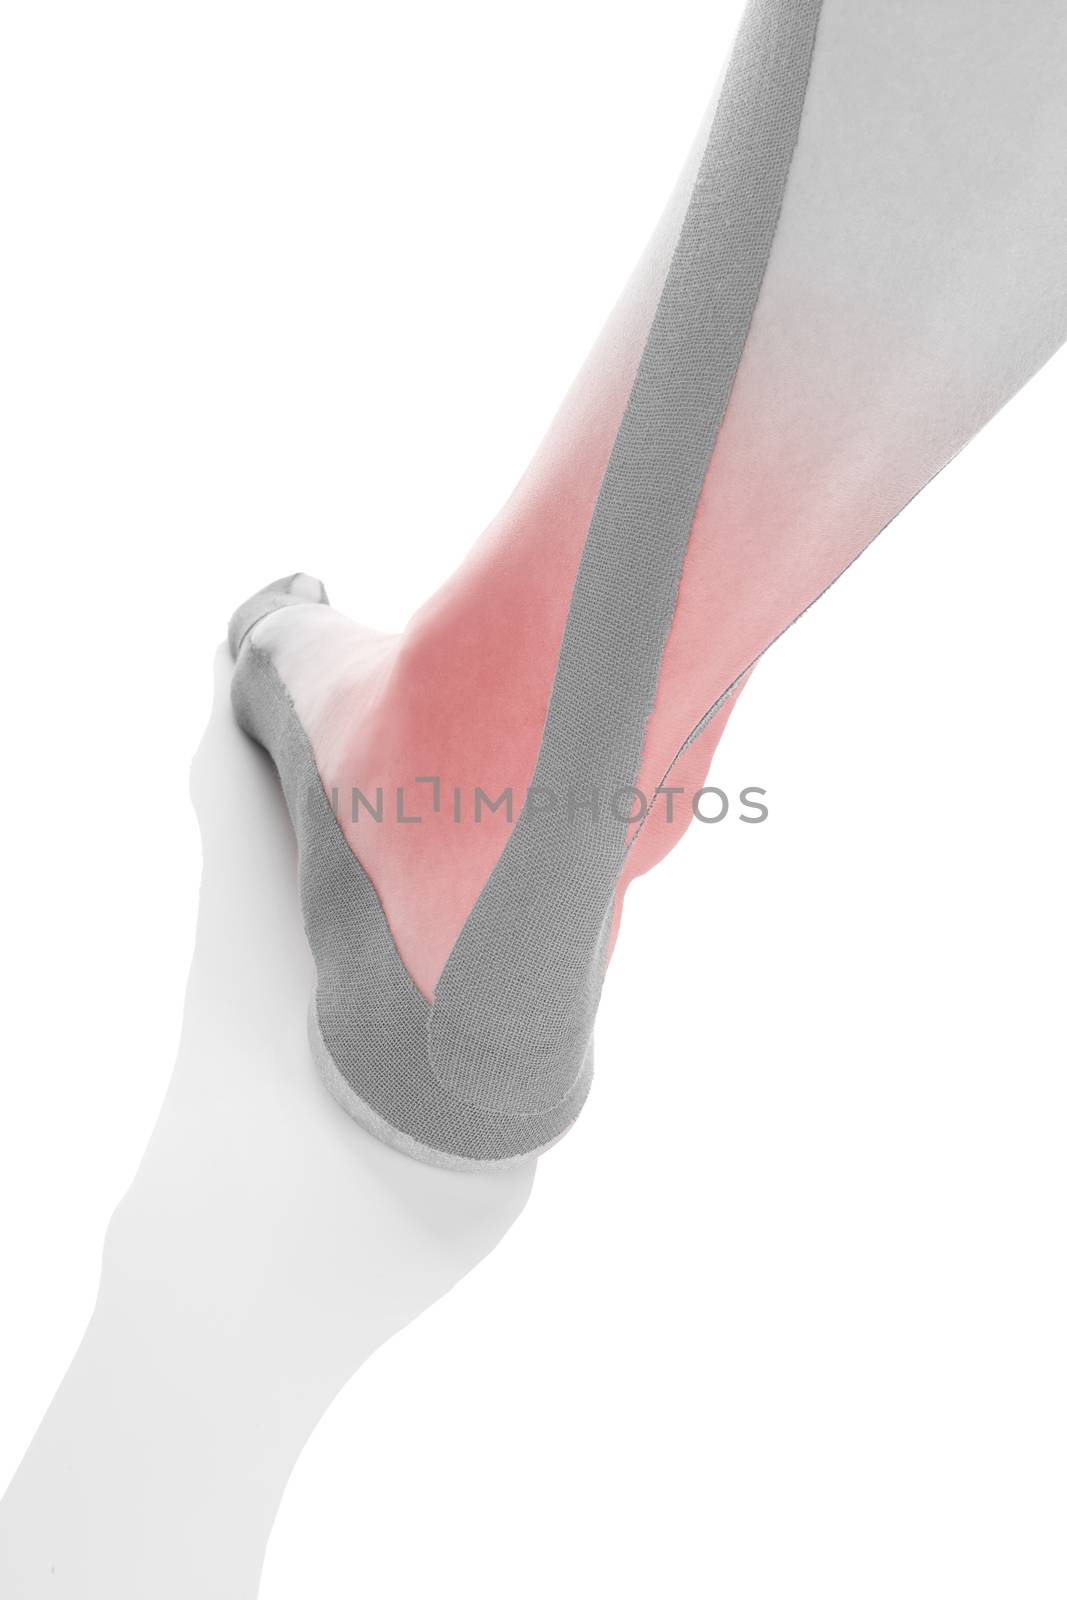 Therapeutic tape on female heel isolated on white background. Chronic pain, alternative medicine. Rehabilitation and physiotherapy.